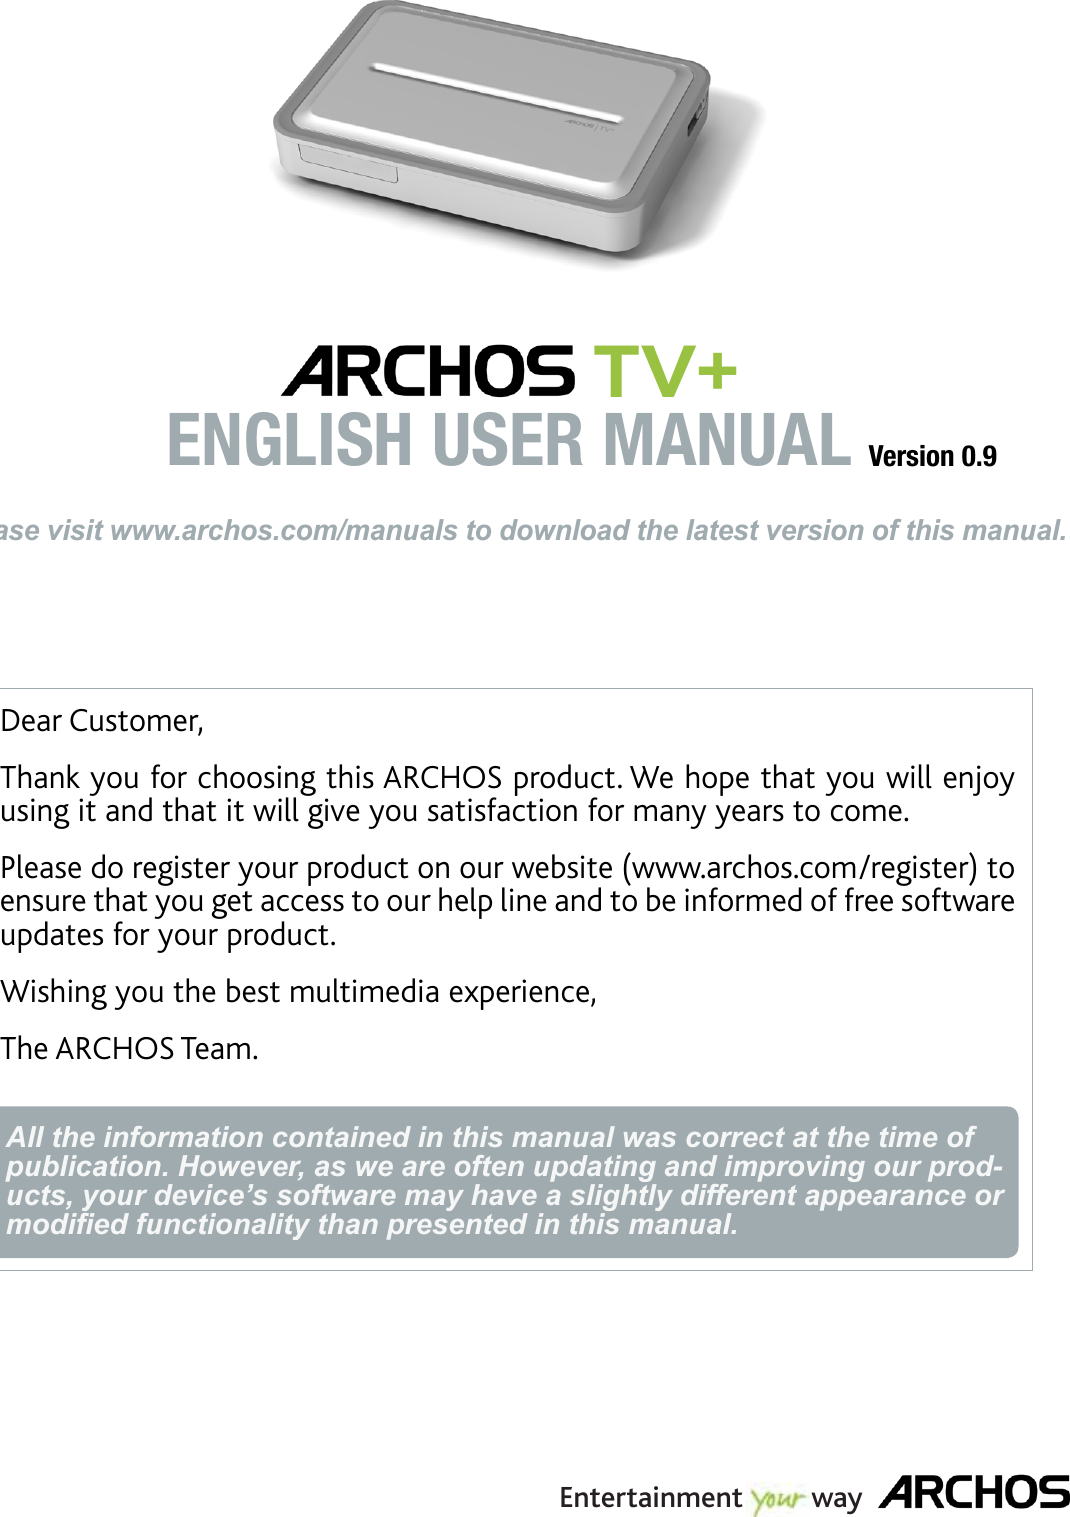 Dear Customer,Thank you for choosing this ARCHOS product. We hope that you will enjoy using it and that it will give you satisfaction for many years to come. Please do register your product on our website (www.archos.com/register) to ensure that you get access to our help line and to be informed of free software updates for your product.Wishing you the best multimedia experience,The ARCHOS Team.All the information contained in this manual was correct at the time of publication. However, as we are often updating and improving our prod-ucts, your device’s software may have a slightly different appearance or modiﬁed functionality than presented in this manual.ENGLISHPlease visit www.archos.com/manuals to download the latest version of this manual. TV+ ENGLISH USER MANUAL Version 0.9Entertainment         way